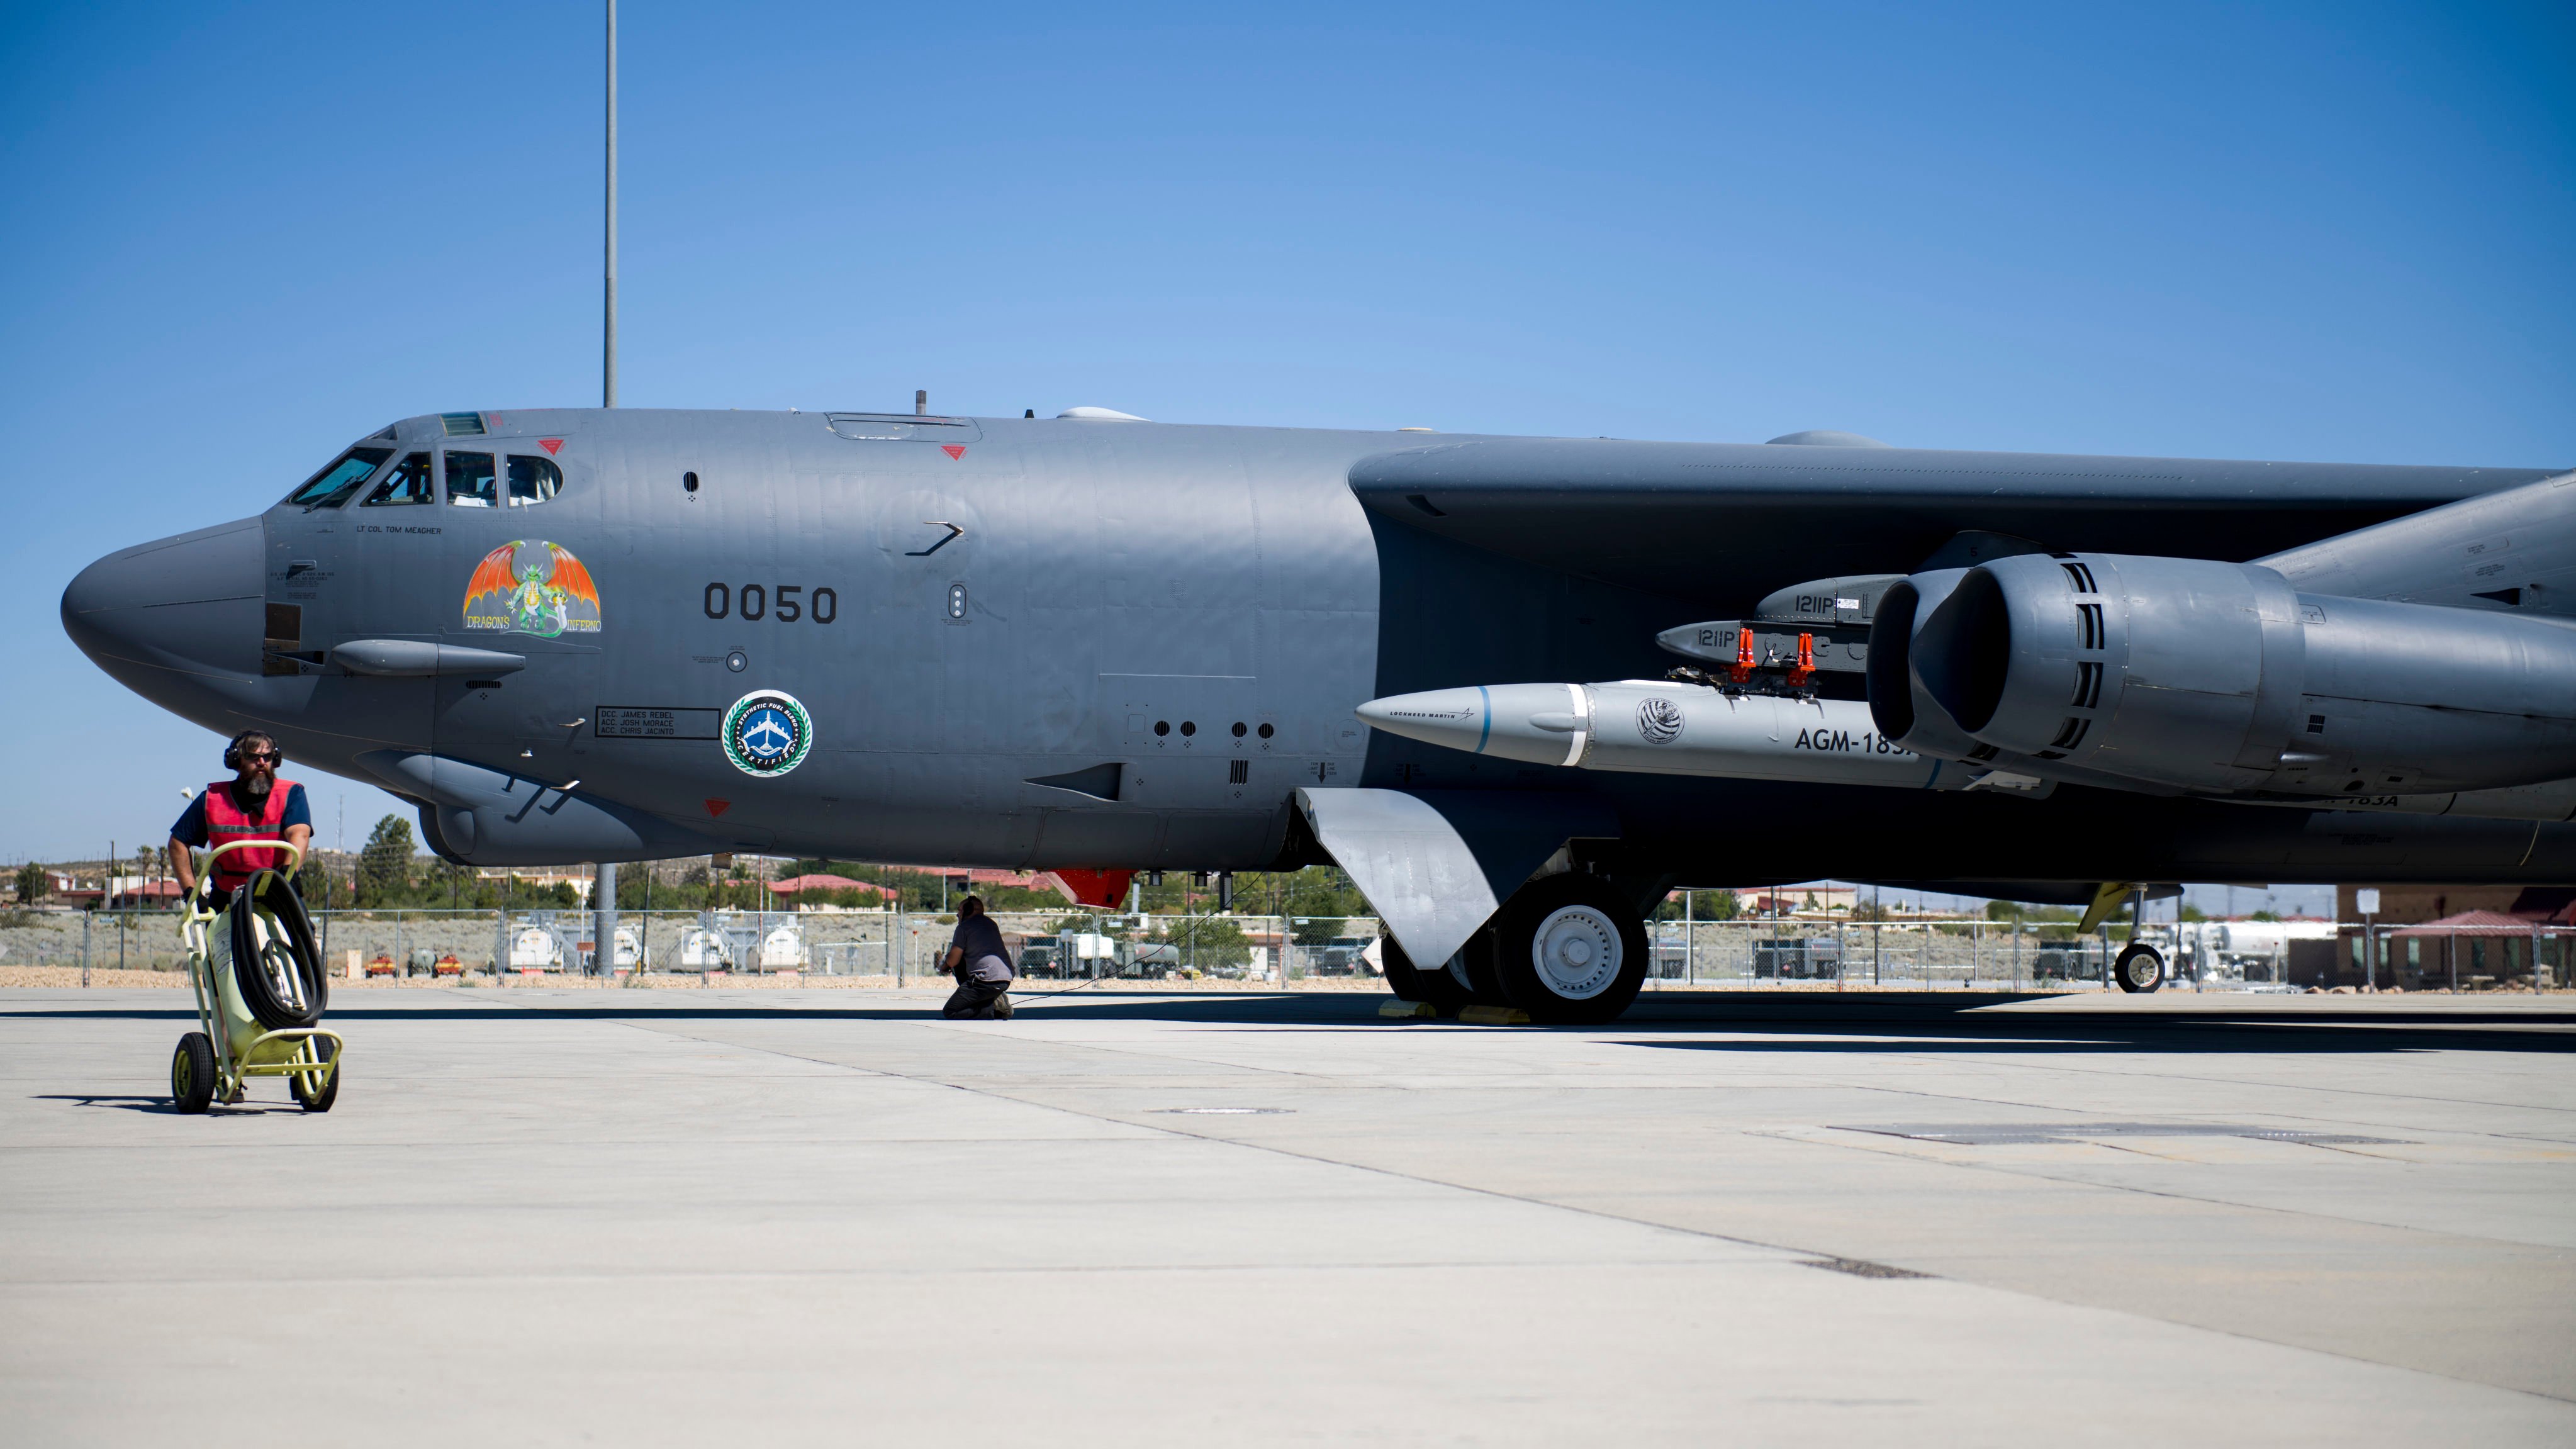 A B-52H Stratofortress is prepared before a flight test of the AGM-183A Air-launched Rapid Response Weapon Instrumented Measurement Vehicle 2 off the coast of California in August 2020. Photo: US Air Force